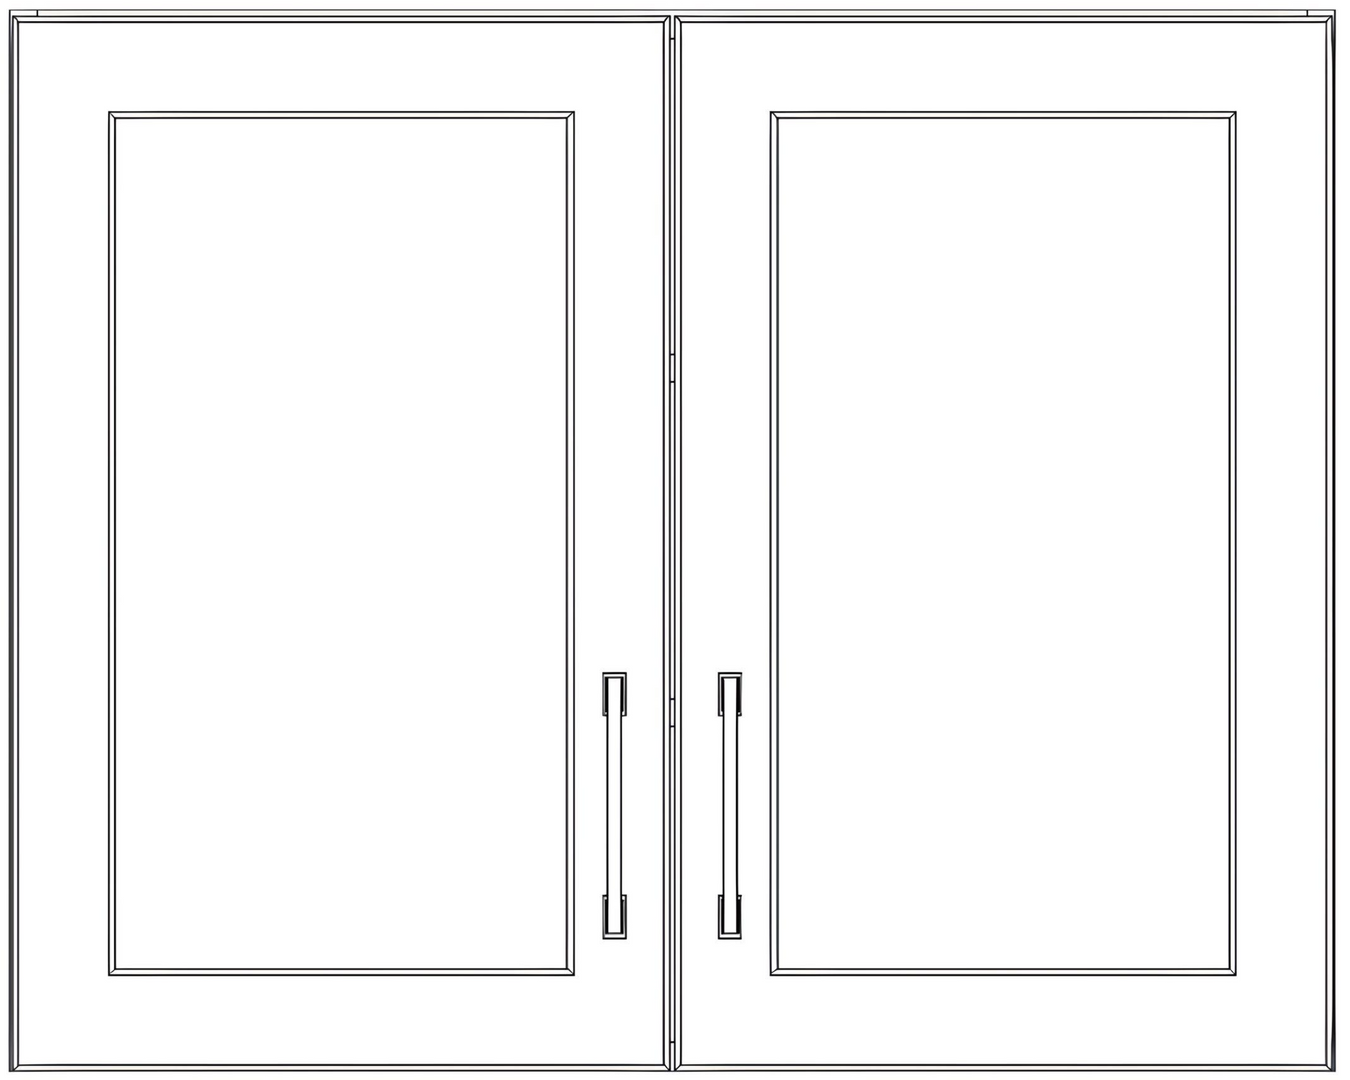 24" High Wall Cabinets - Painted Doors